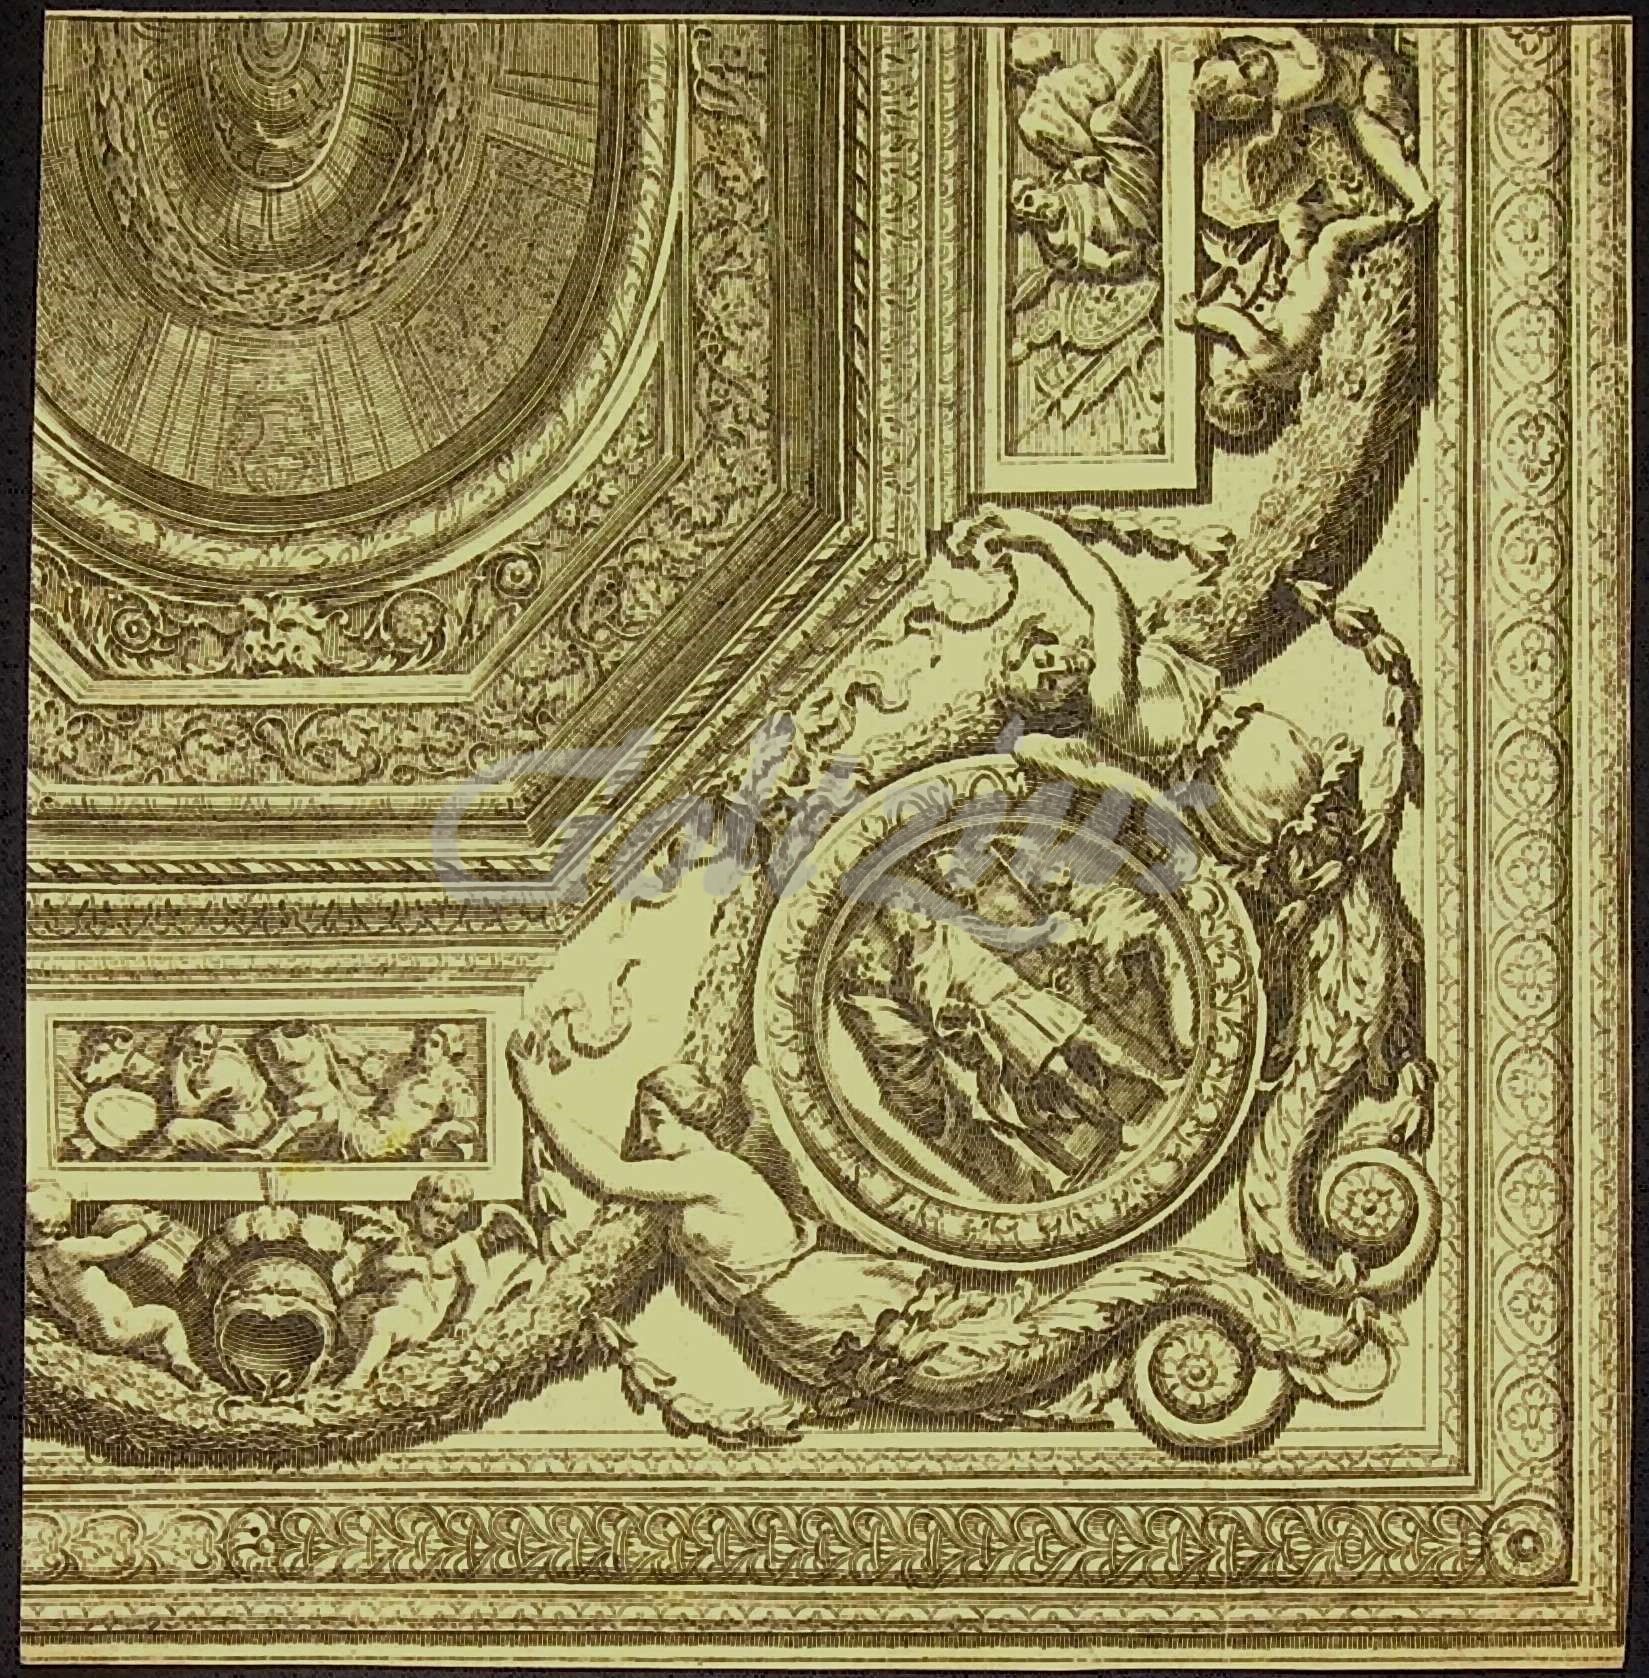 ANONYMOUS, Corner of a ceiling ornament